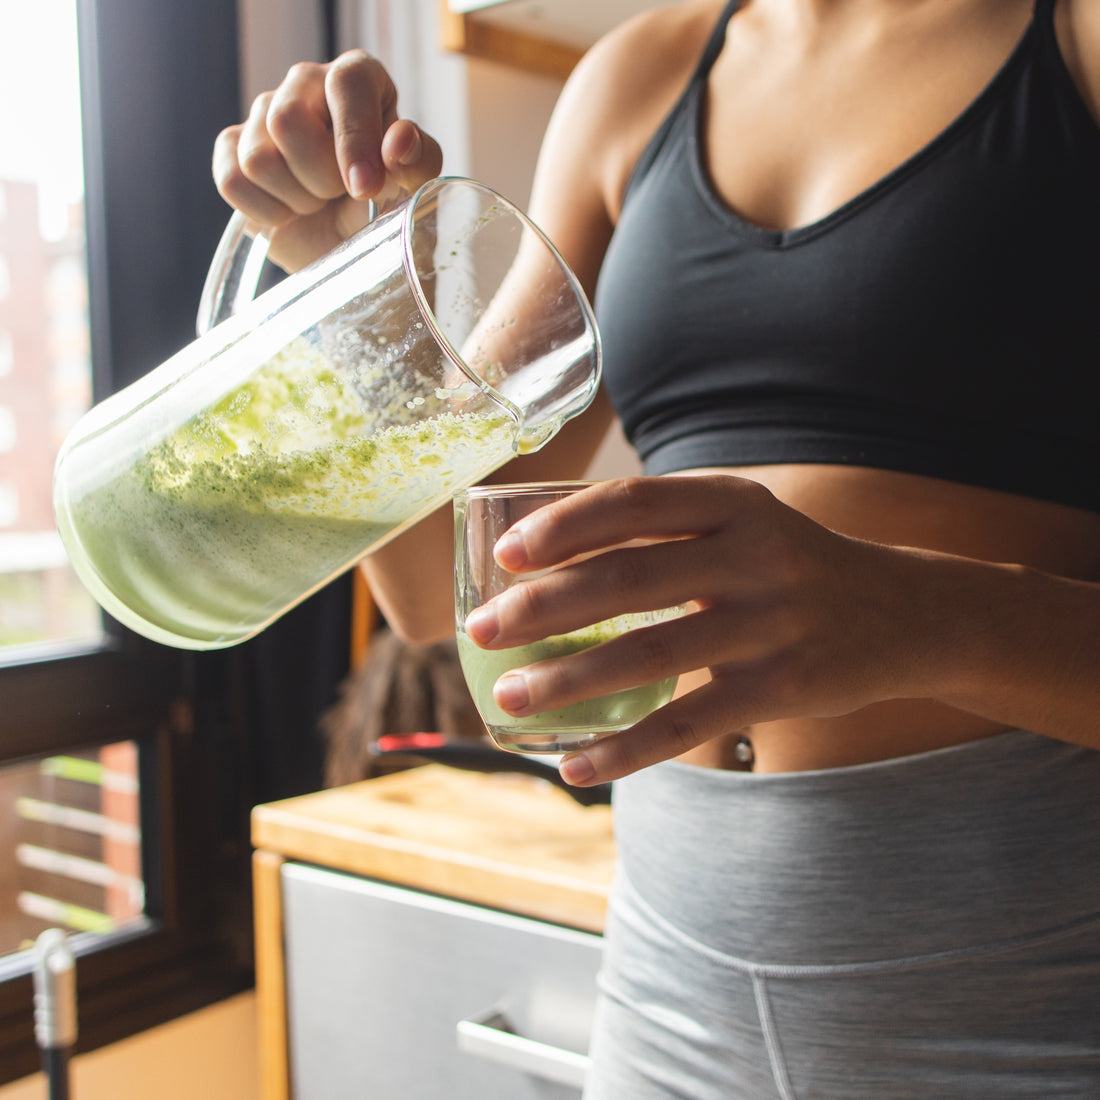 Detoxing: The Importance of Supporting Your Body's Natural Process